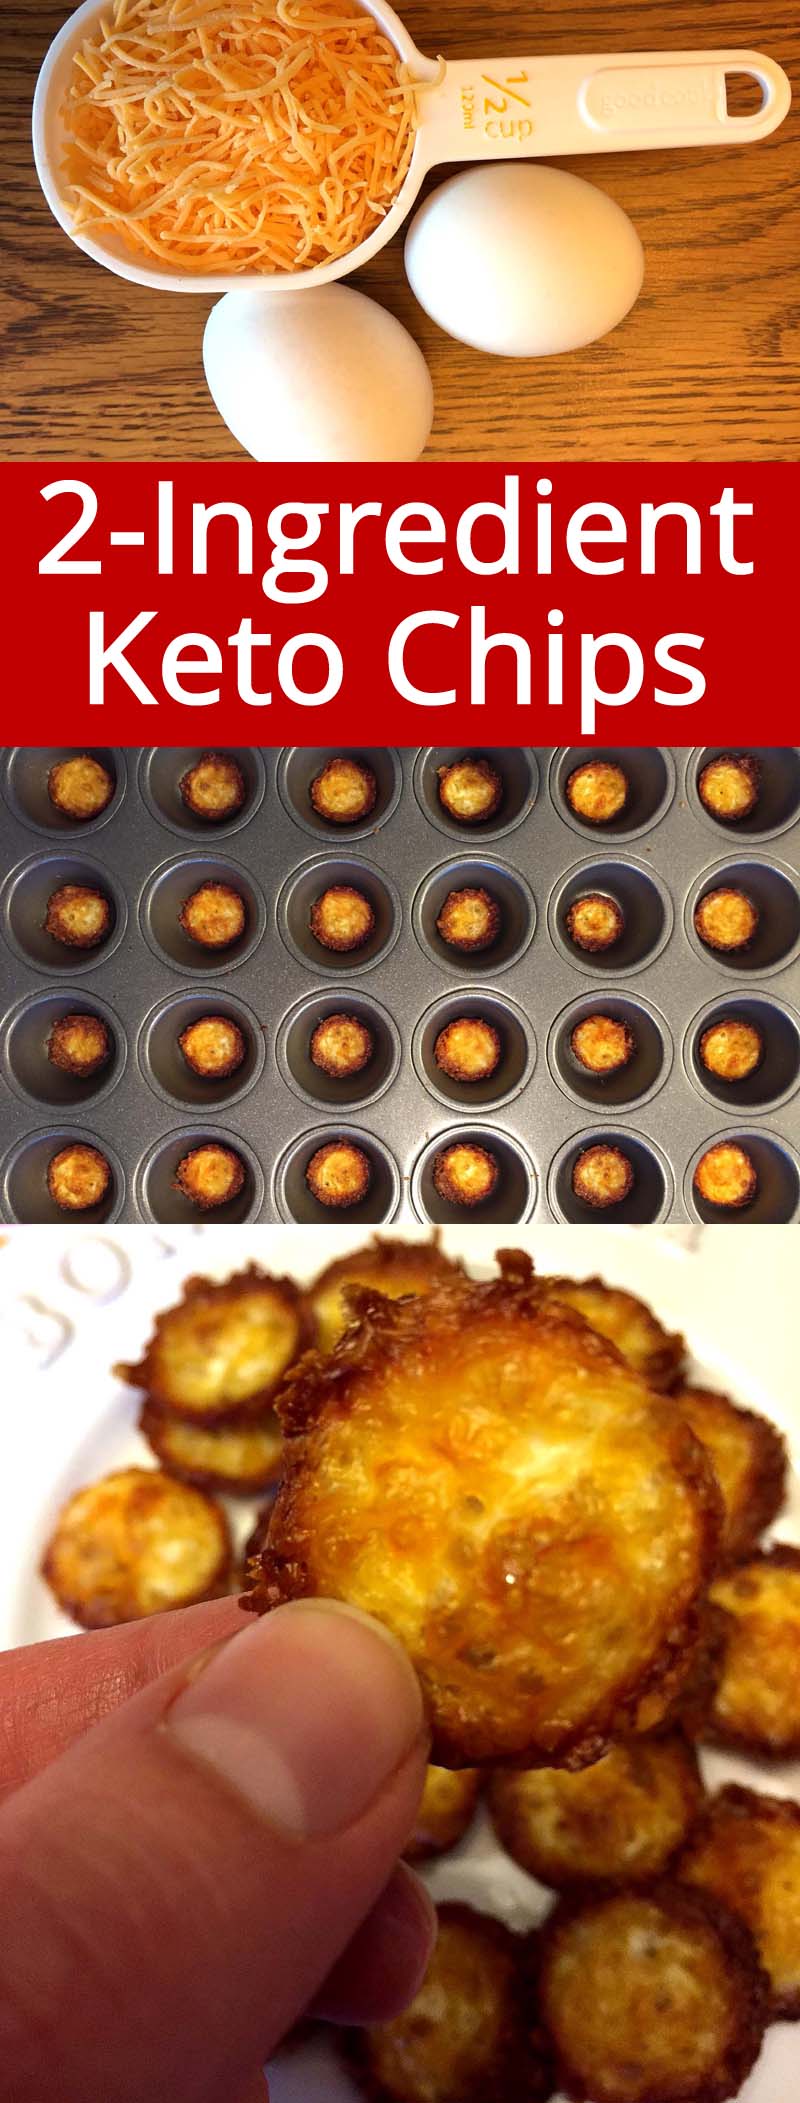 2 Ingredient Keto Chips – Low Carb, Gluten-Free and So Crunchy